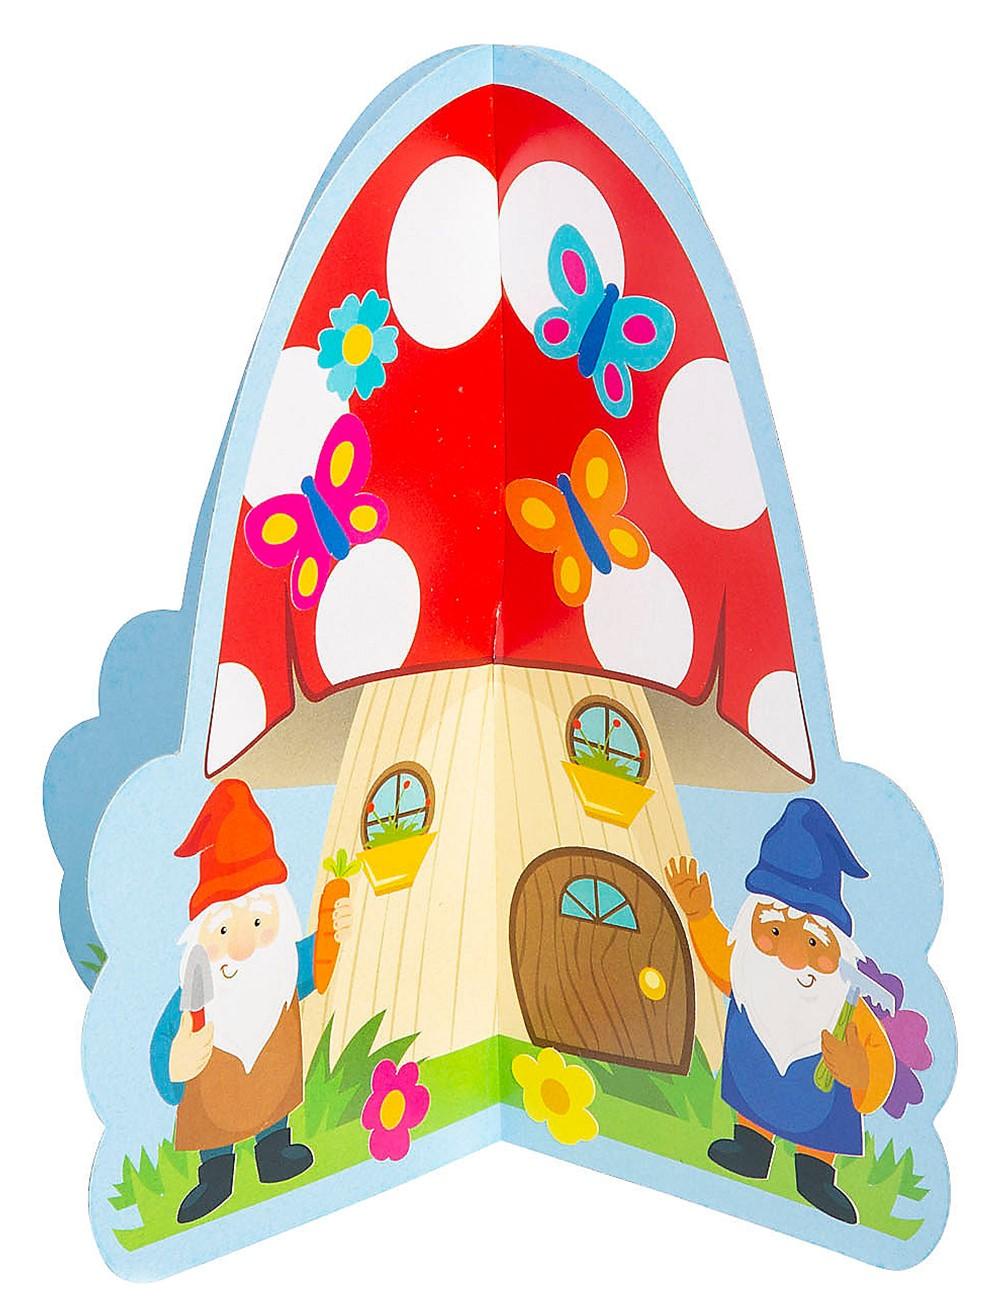 3D STICKER SCENCE WITH A GNOME WEARING A RED HAT, A GNOME WEARING A BLUE HAT, AND A RED TOADSTOOL HOUSE WITH WHITE POLKA DOTS AND A GARDENS